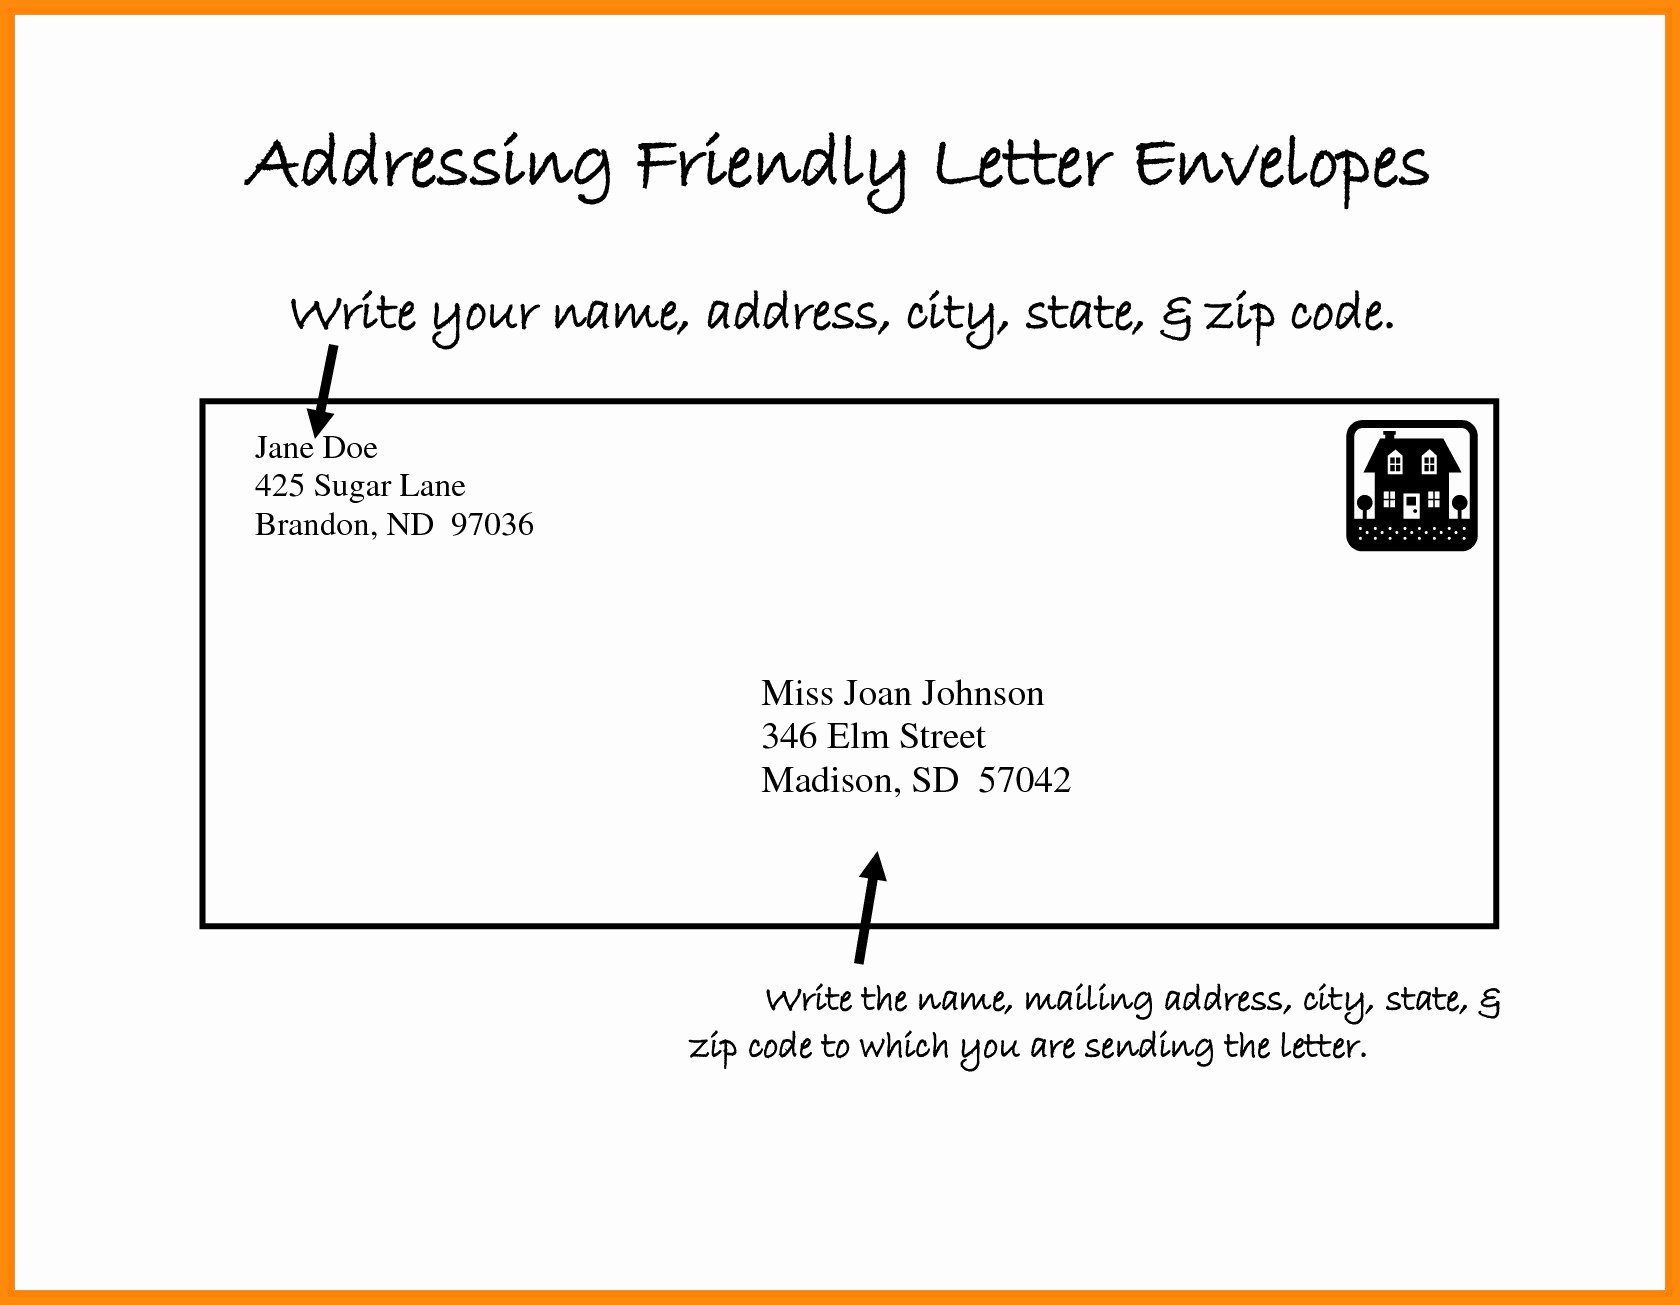 Po Box Letter format Beautiful Chinese Letter Envelope format Valid Addressing Letter to